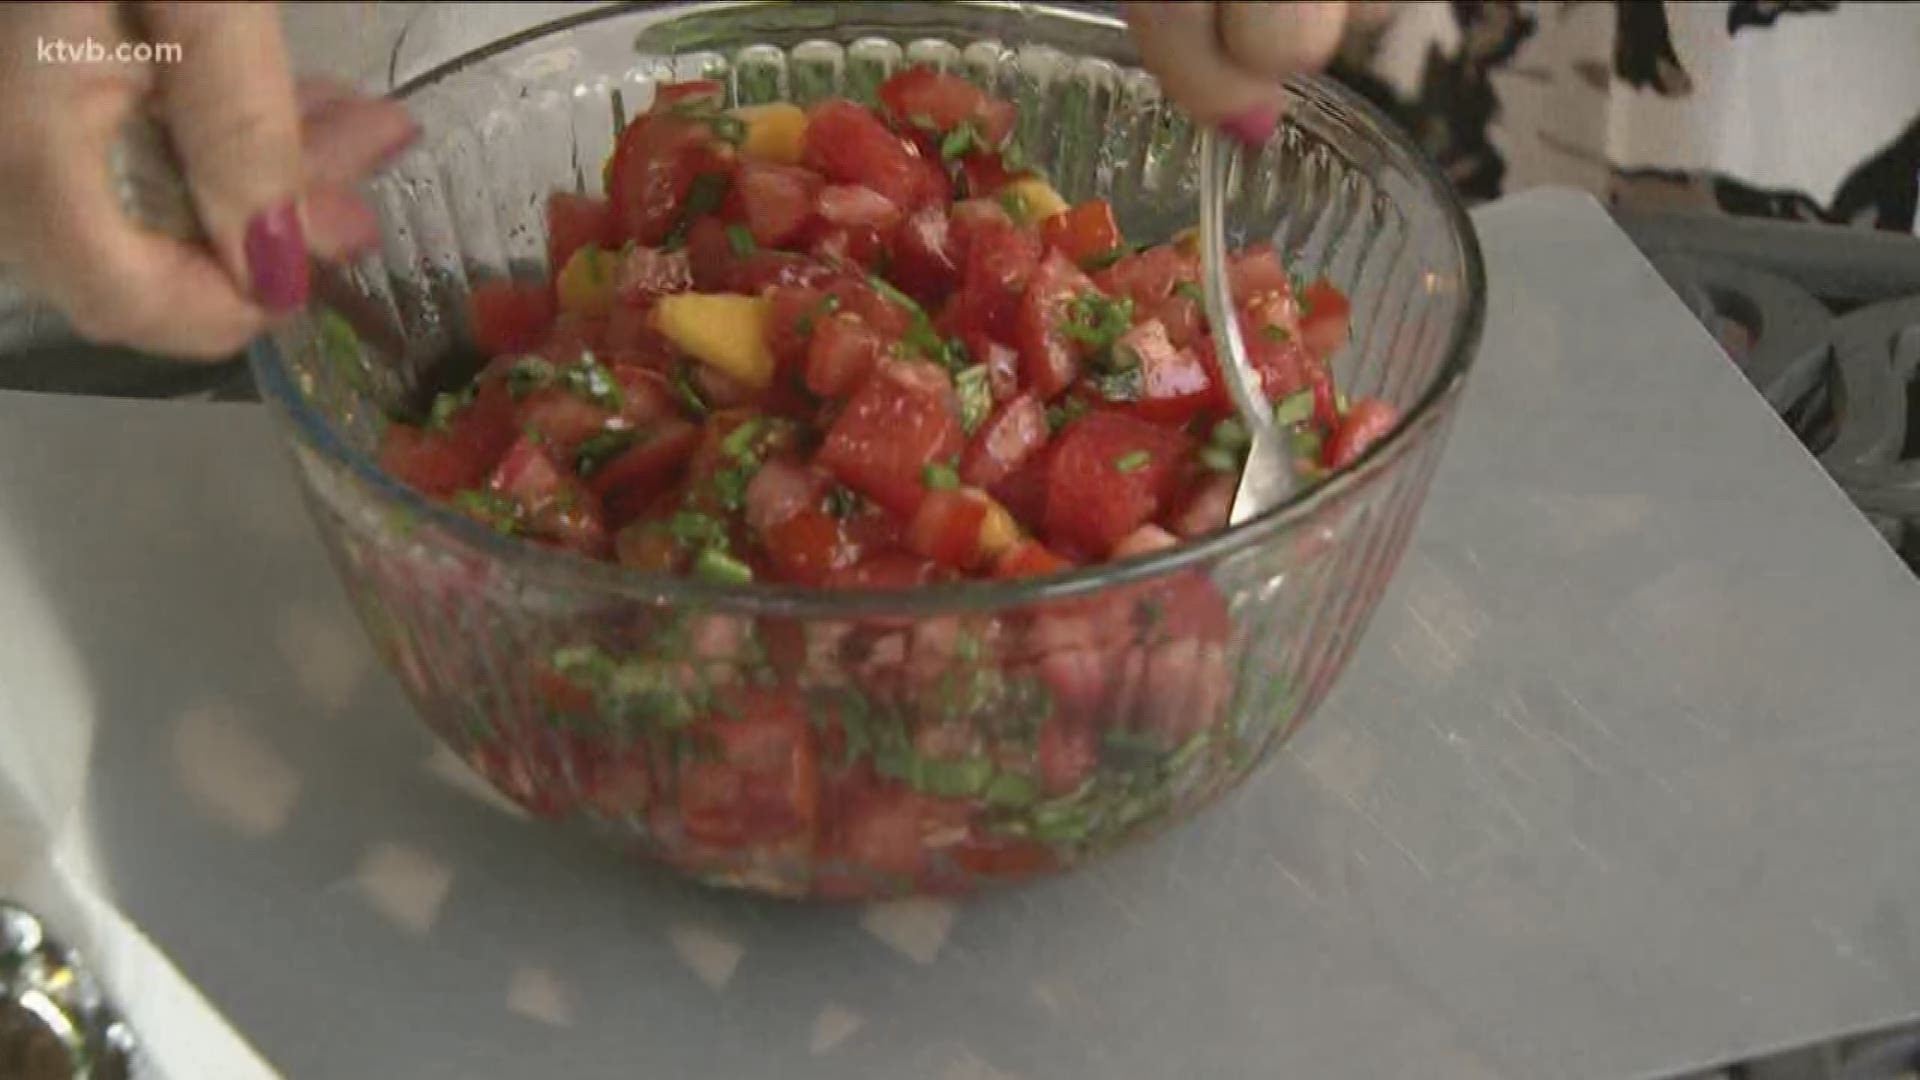 Leah Clark shows us how to make a salsa that is slightly spicy.